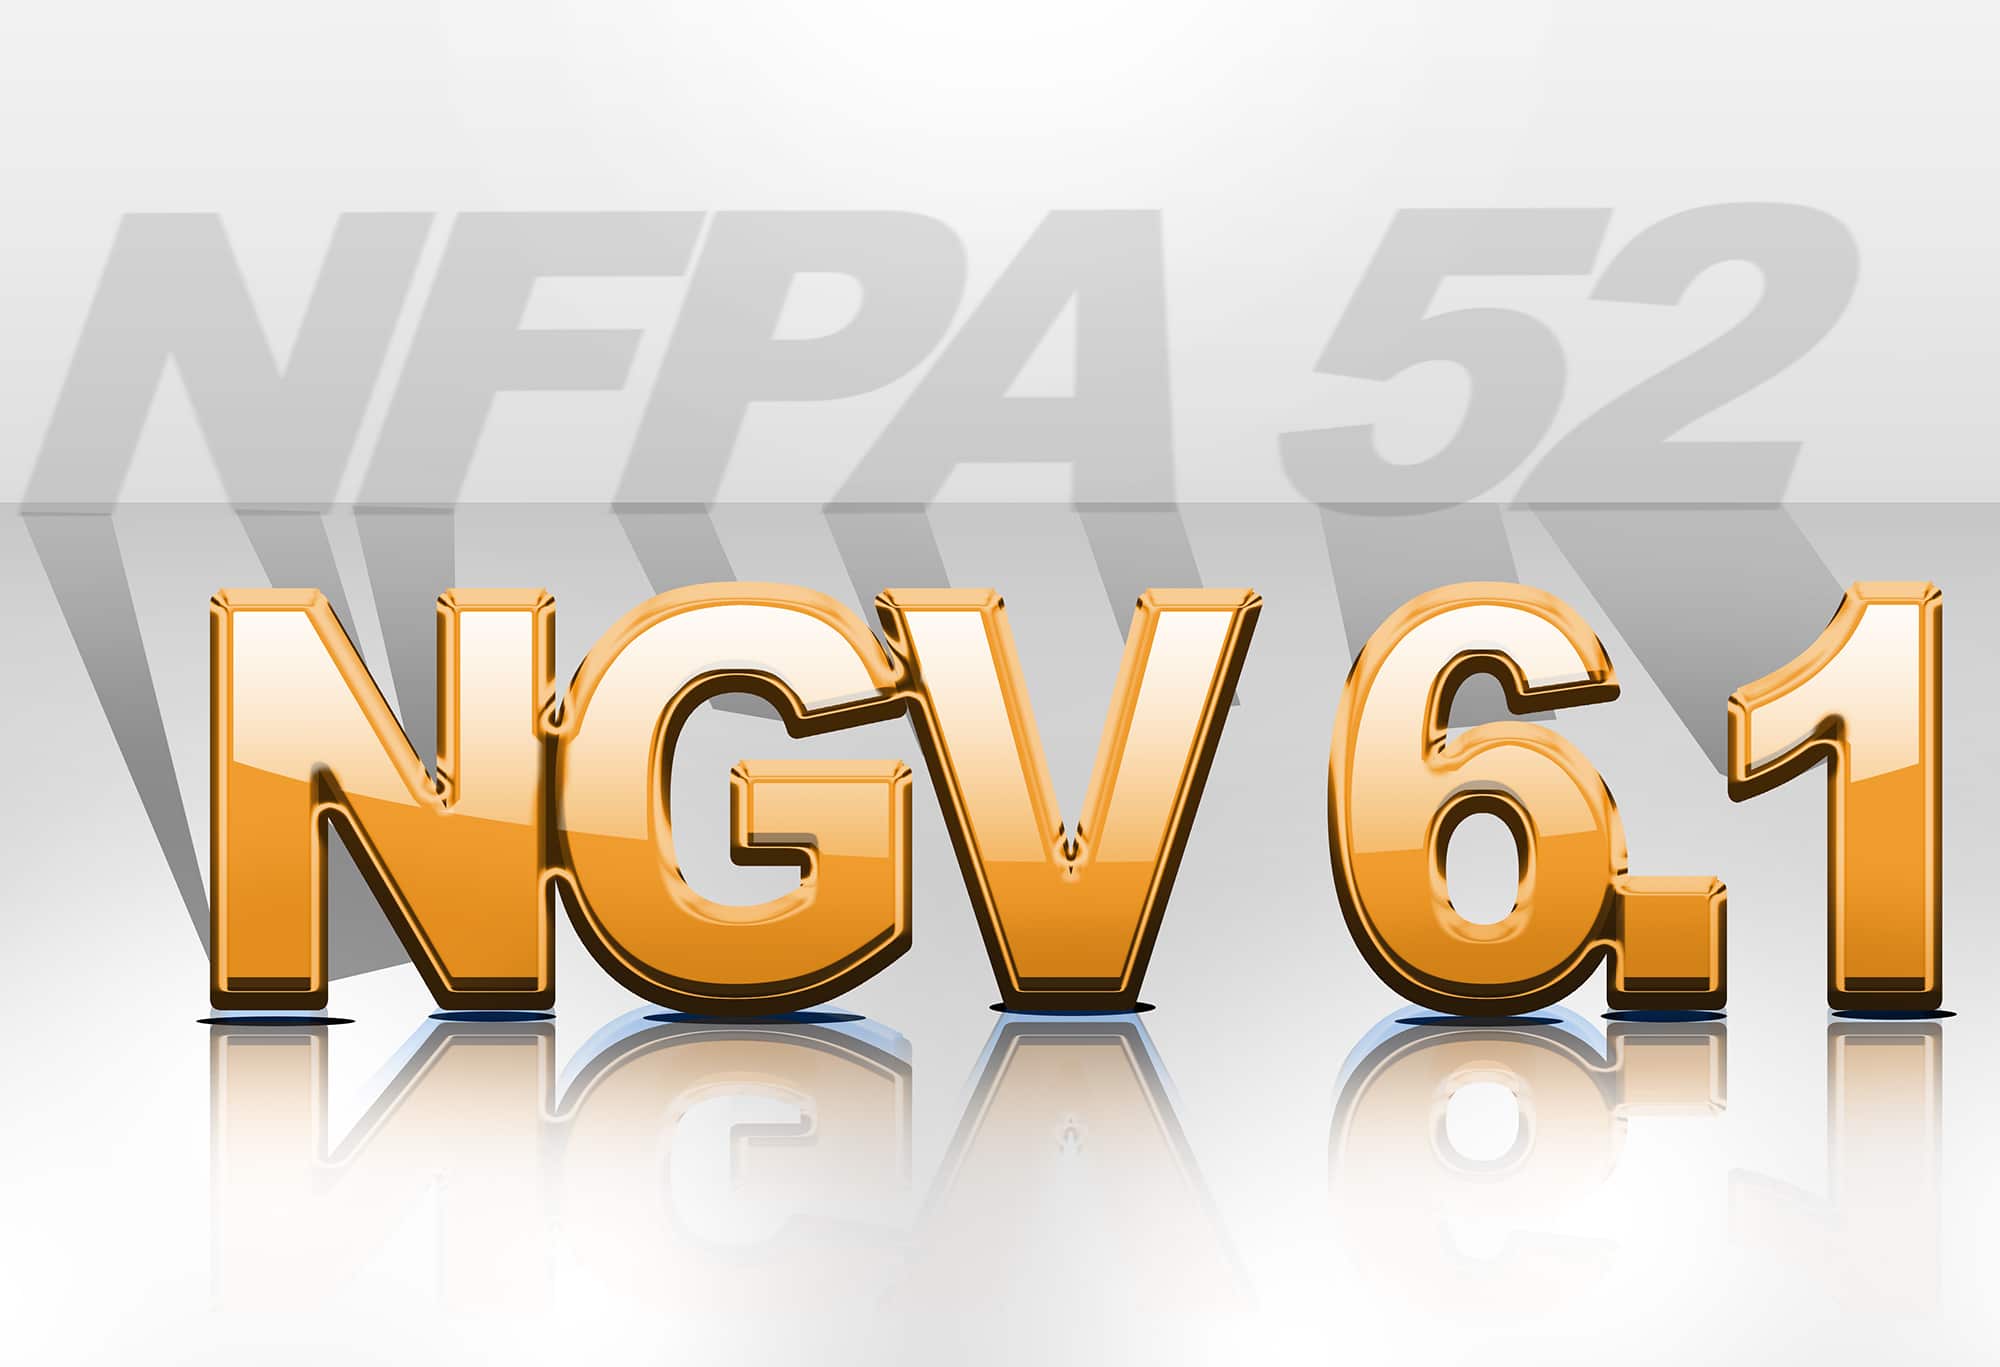 NFPA 52 is displayed as the shadow of NGV 6.1